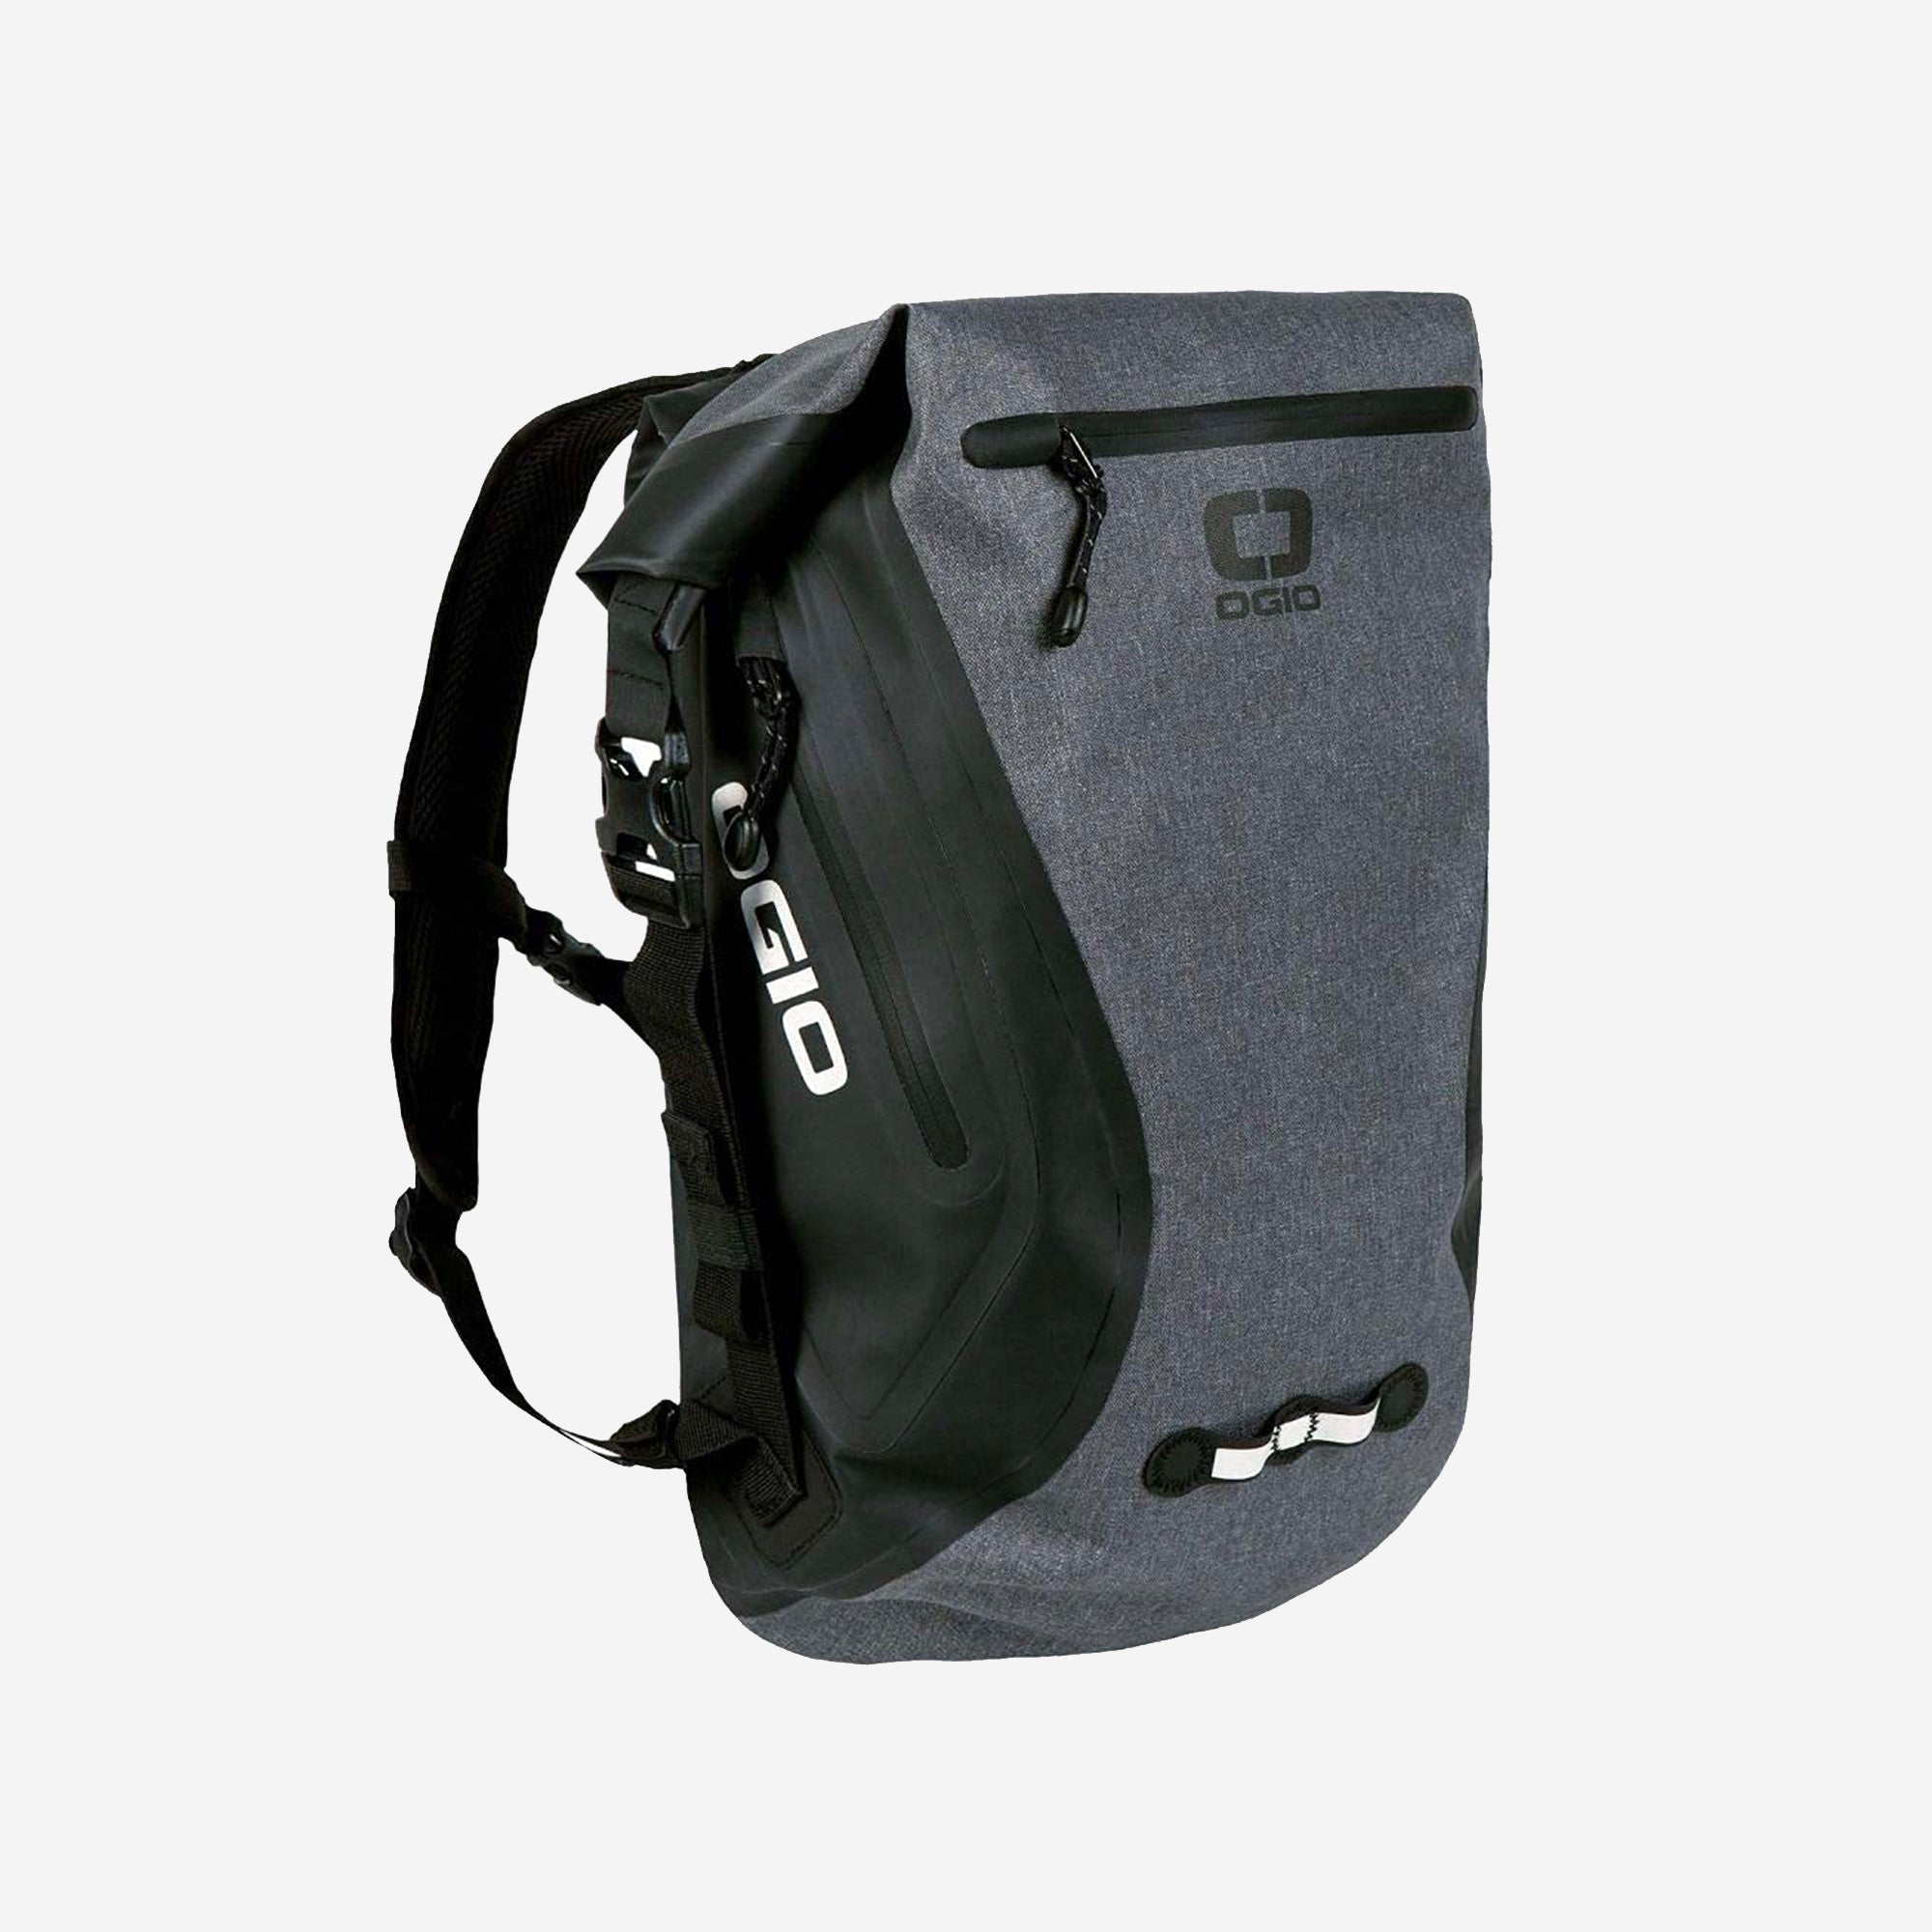 All Elements Aero D Backpack